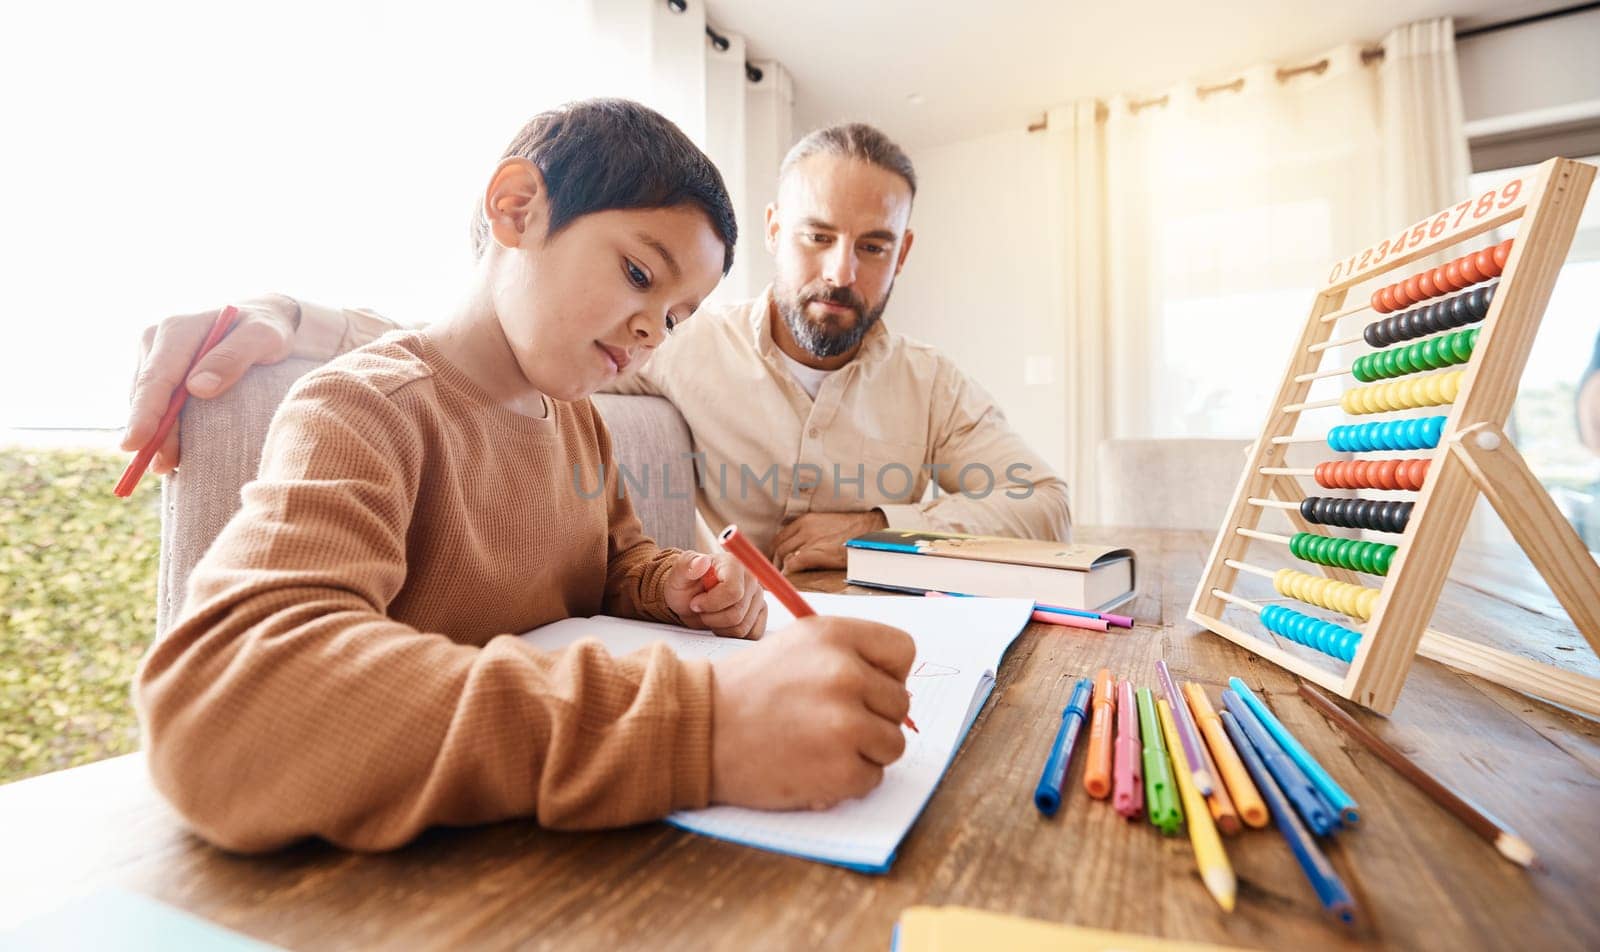 Learning, math education and father with child in home with book for studying, homework or homeschool. Development, growth and boy or kid with man teaching him how to count, numbers and writing